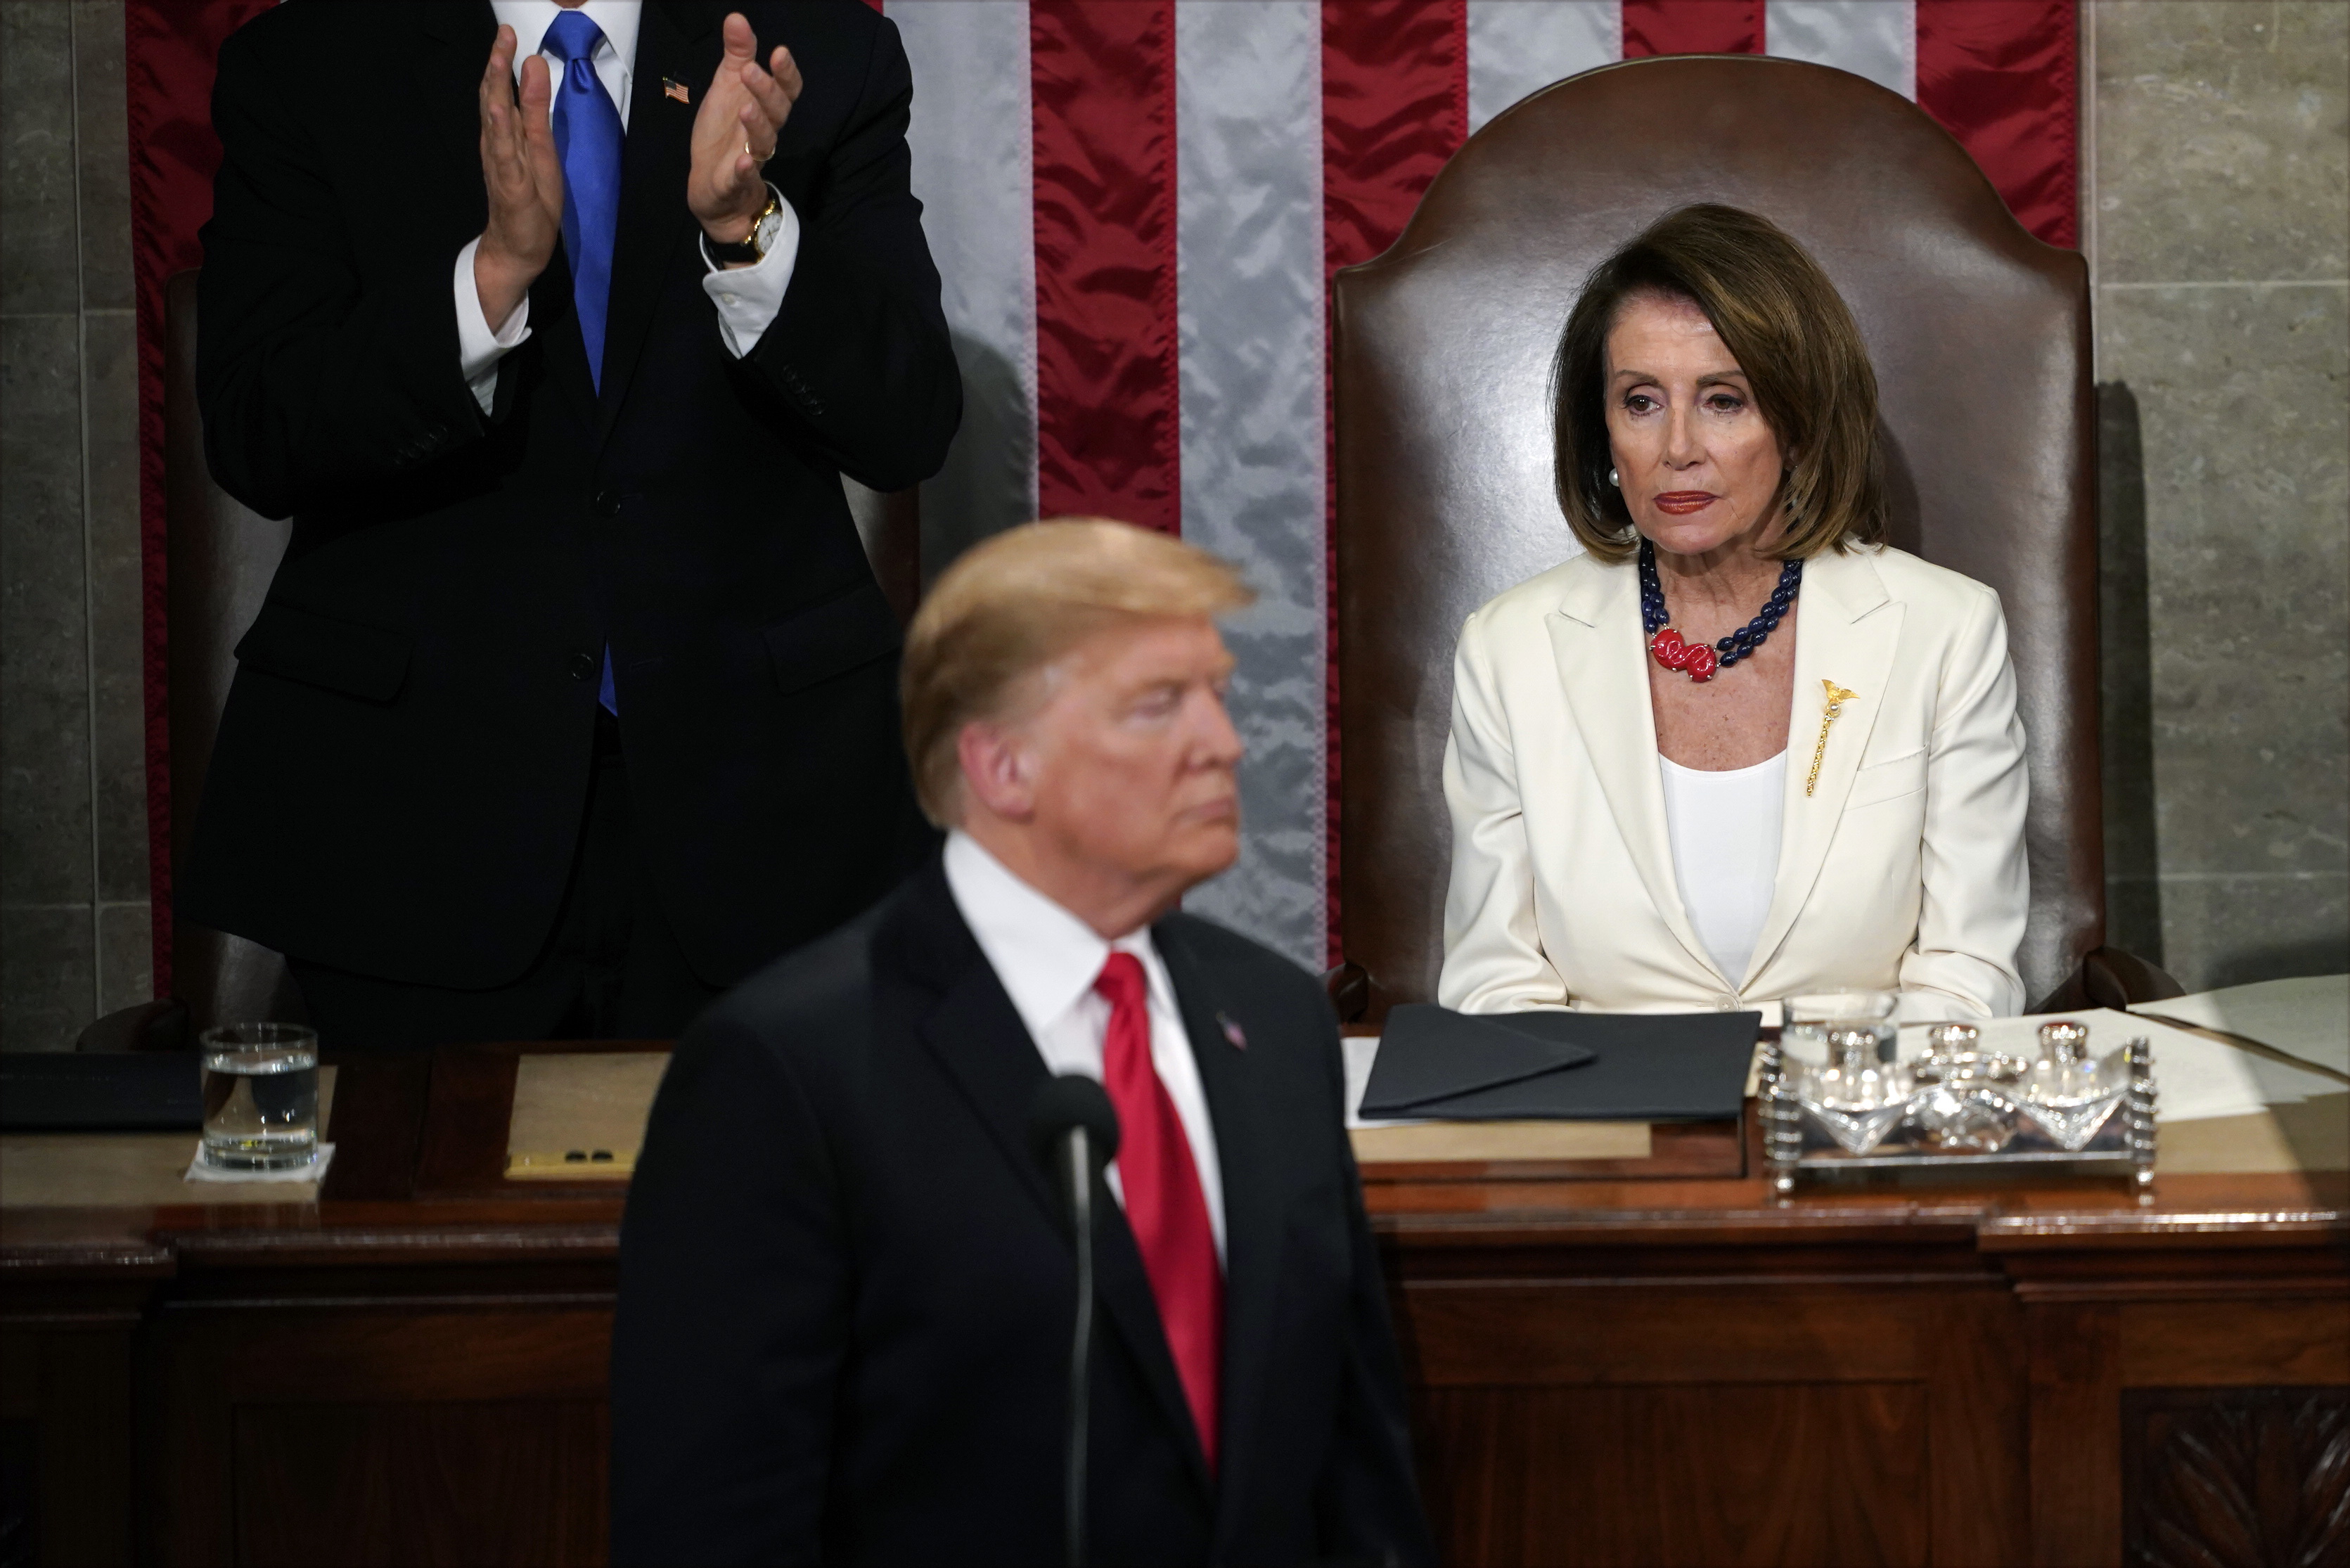 Pelosi confirms Trump's use of office for personal gain